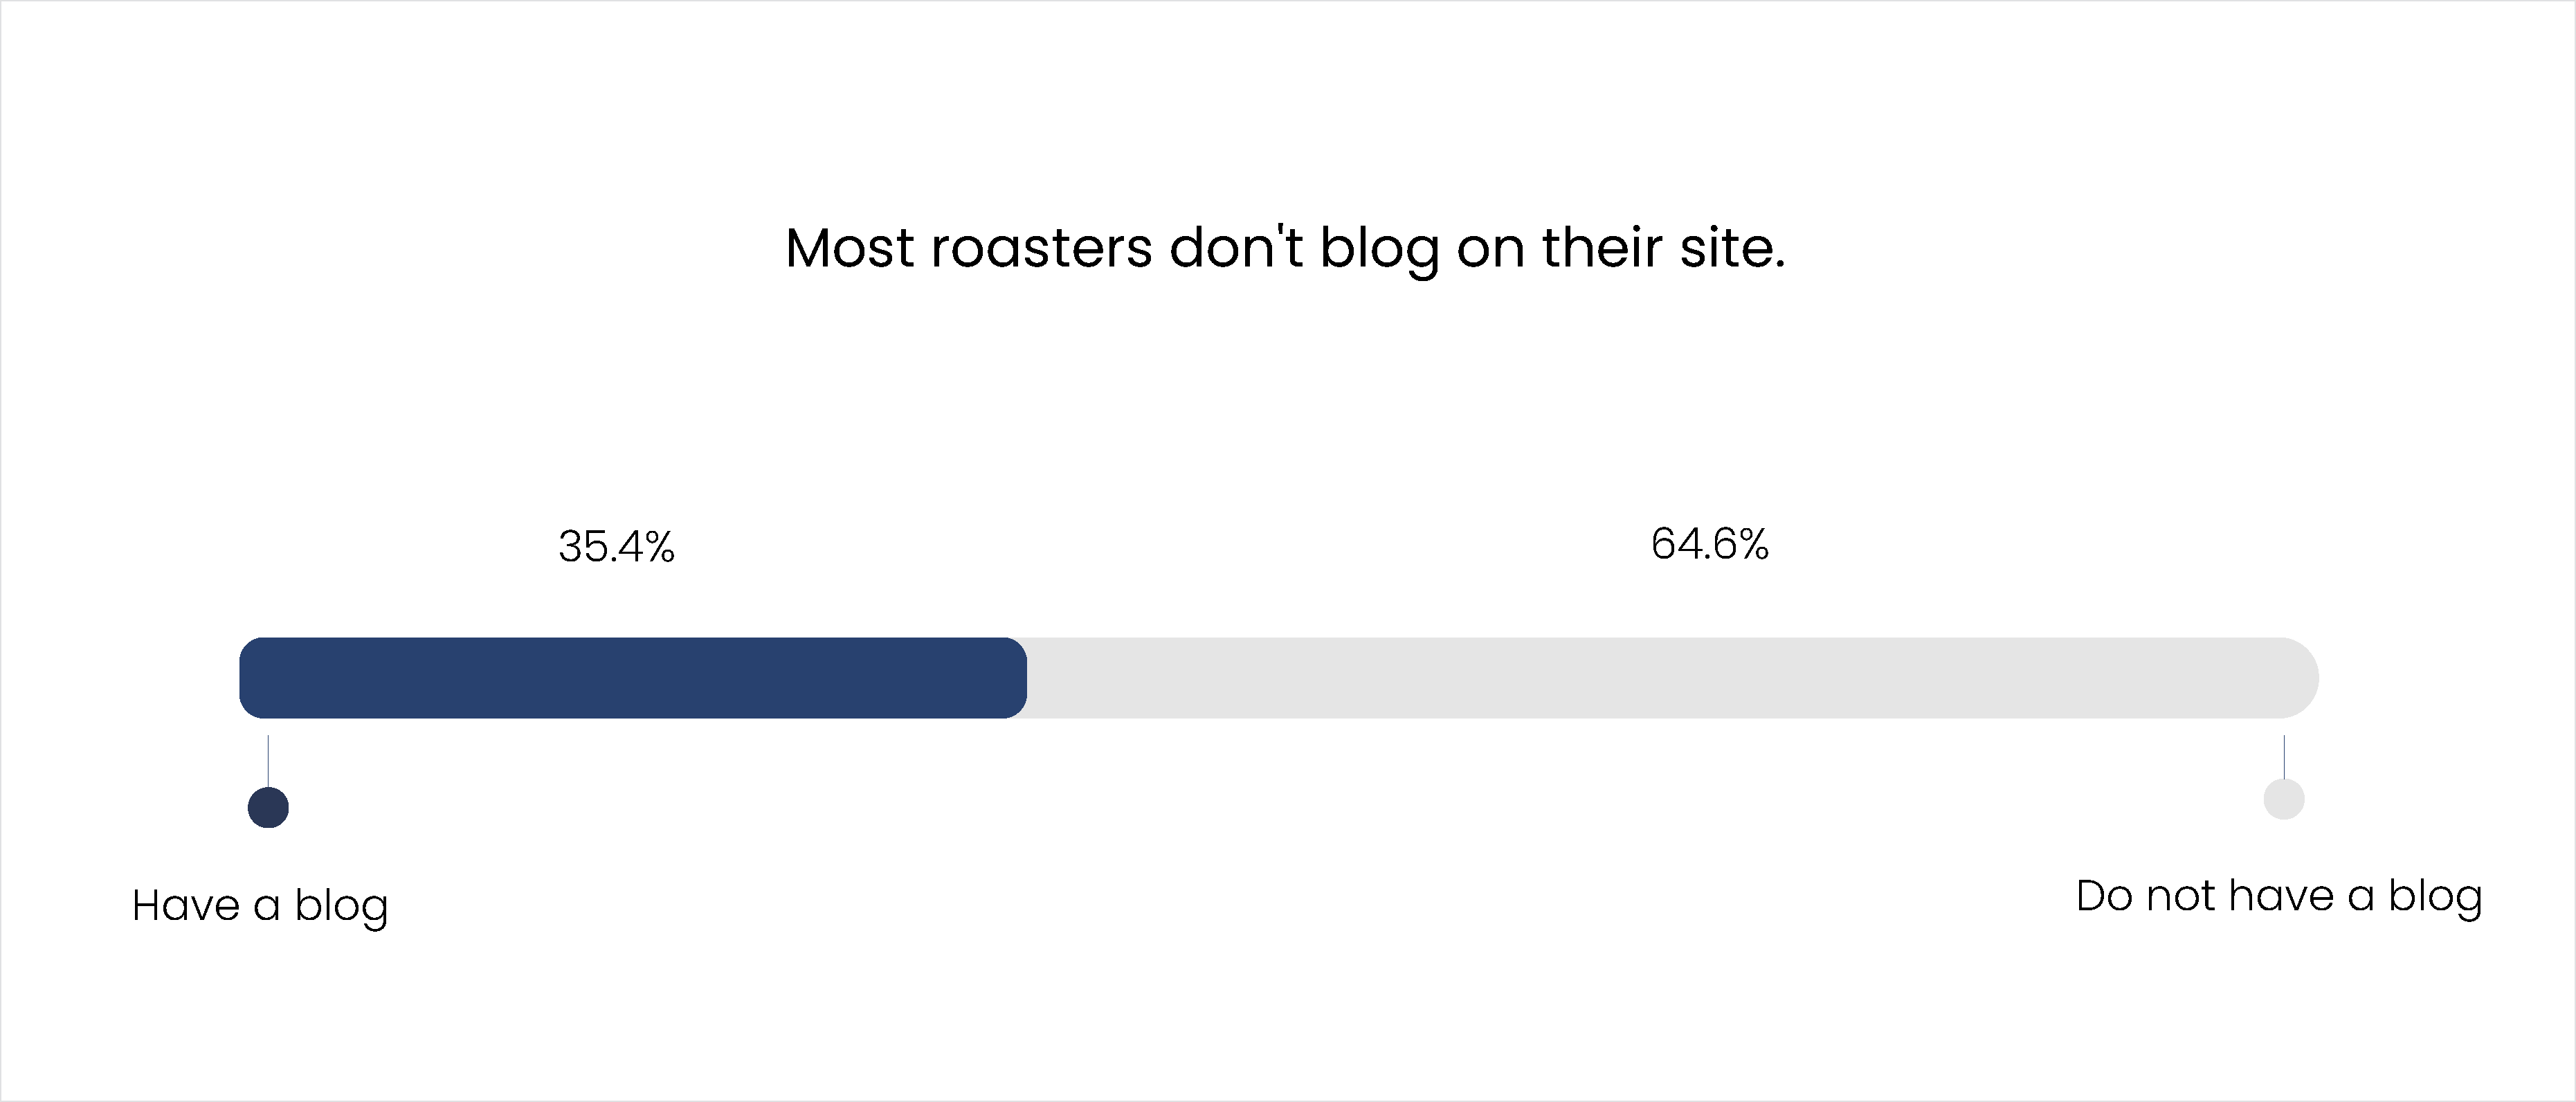 Most roasters don't blog on their site